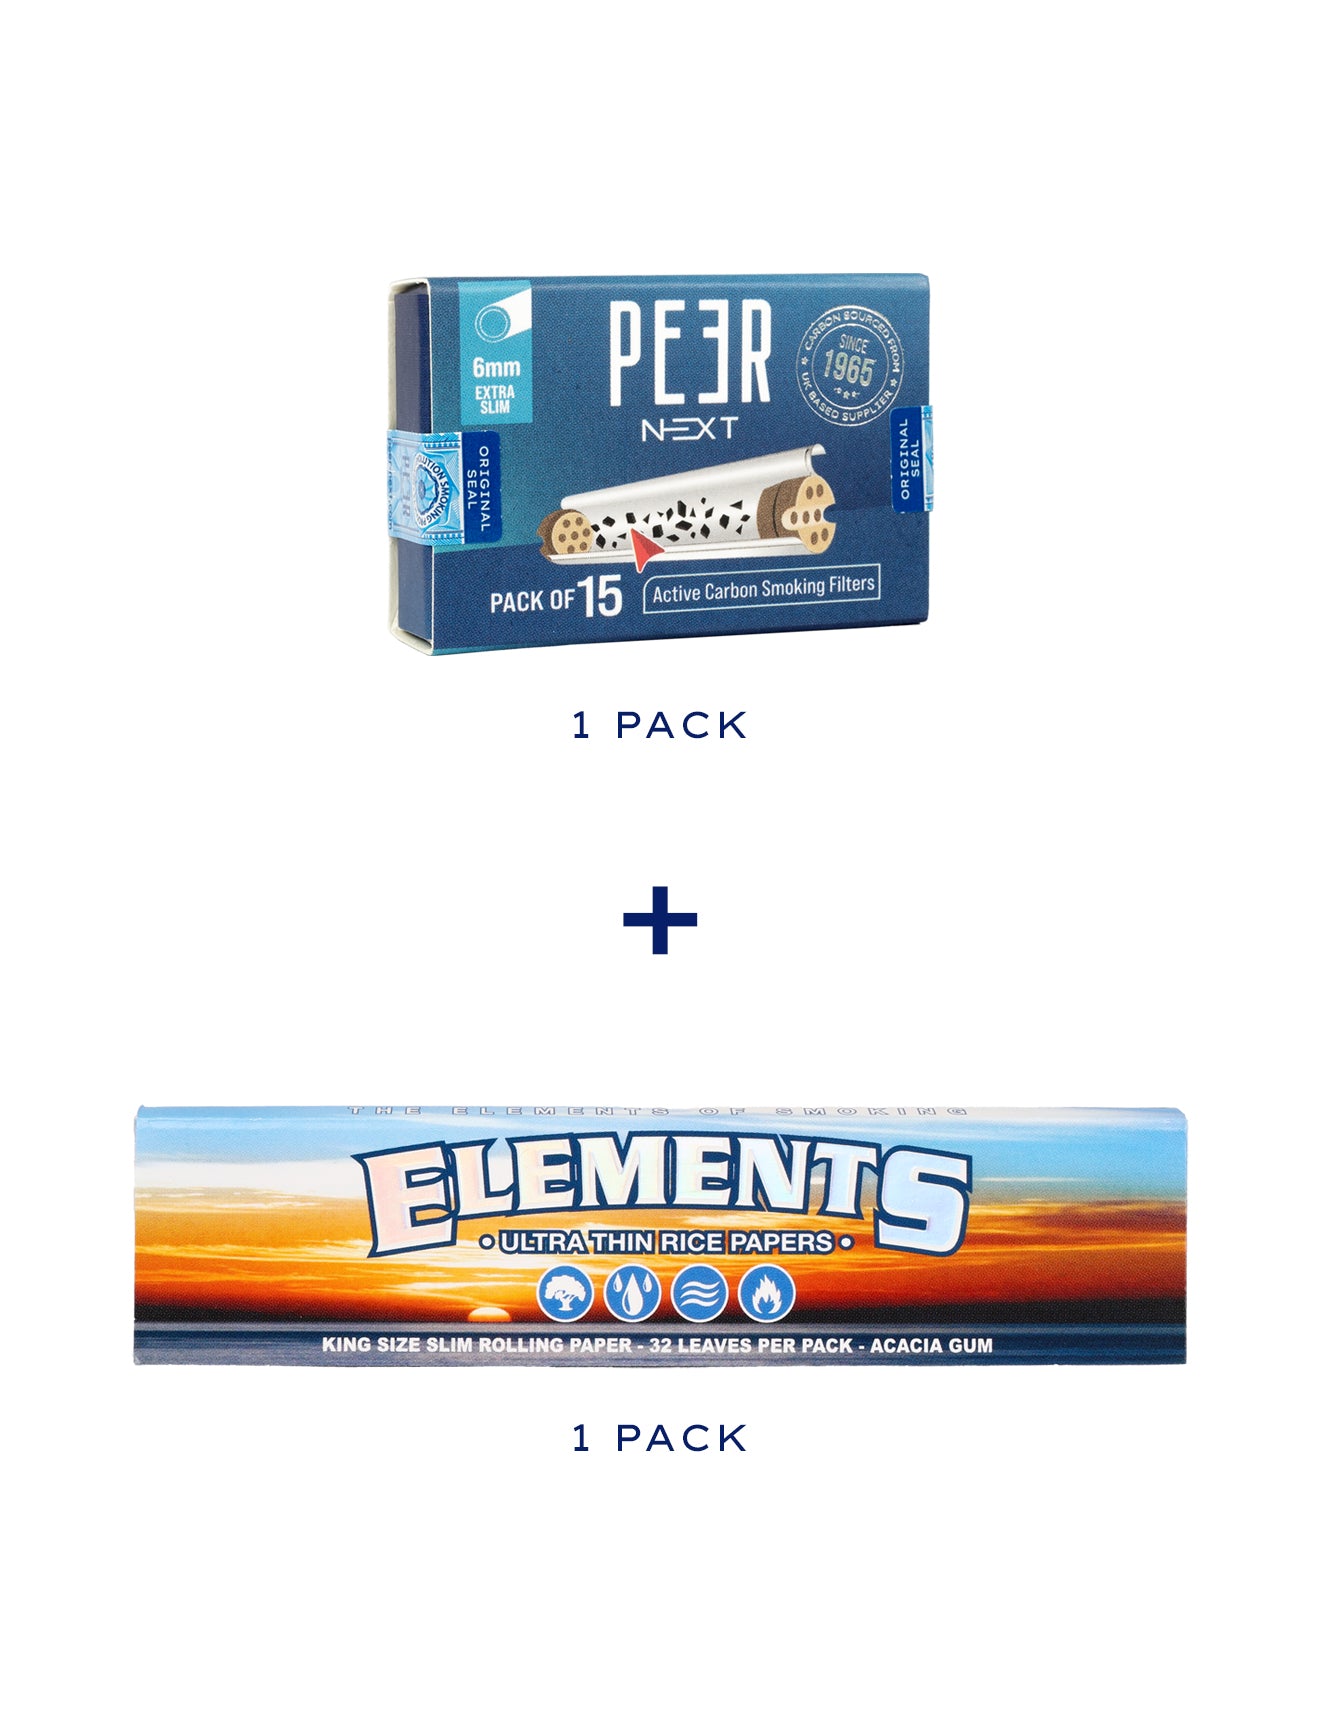 PEER Next combo pack of active carbon smoking filters and Elements rolling paper